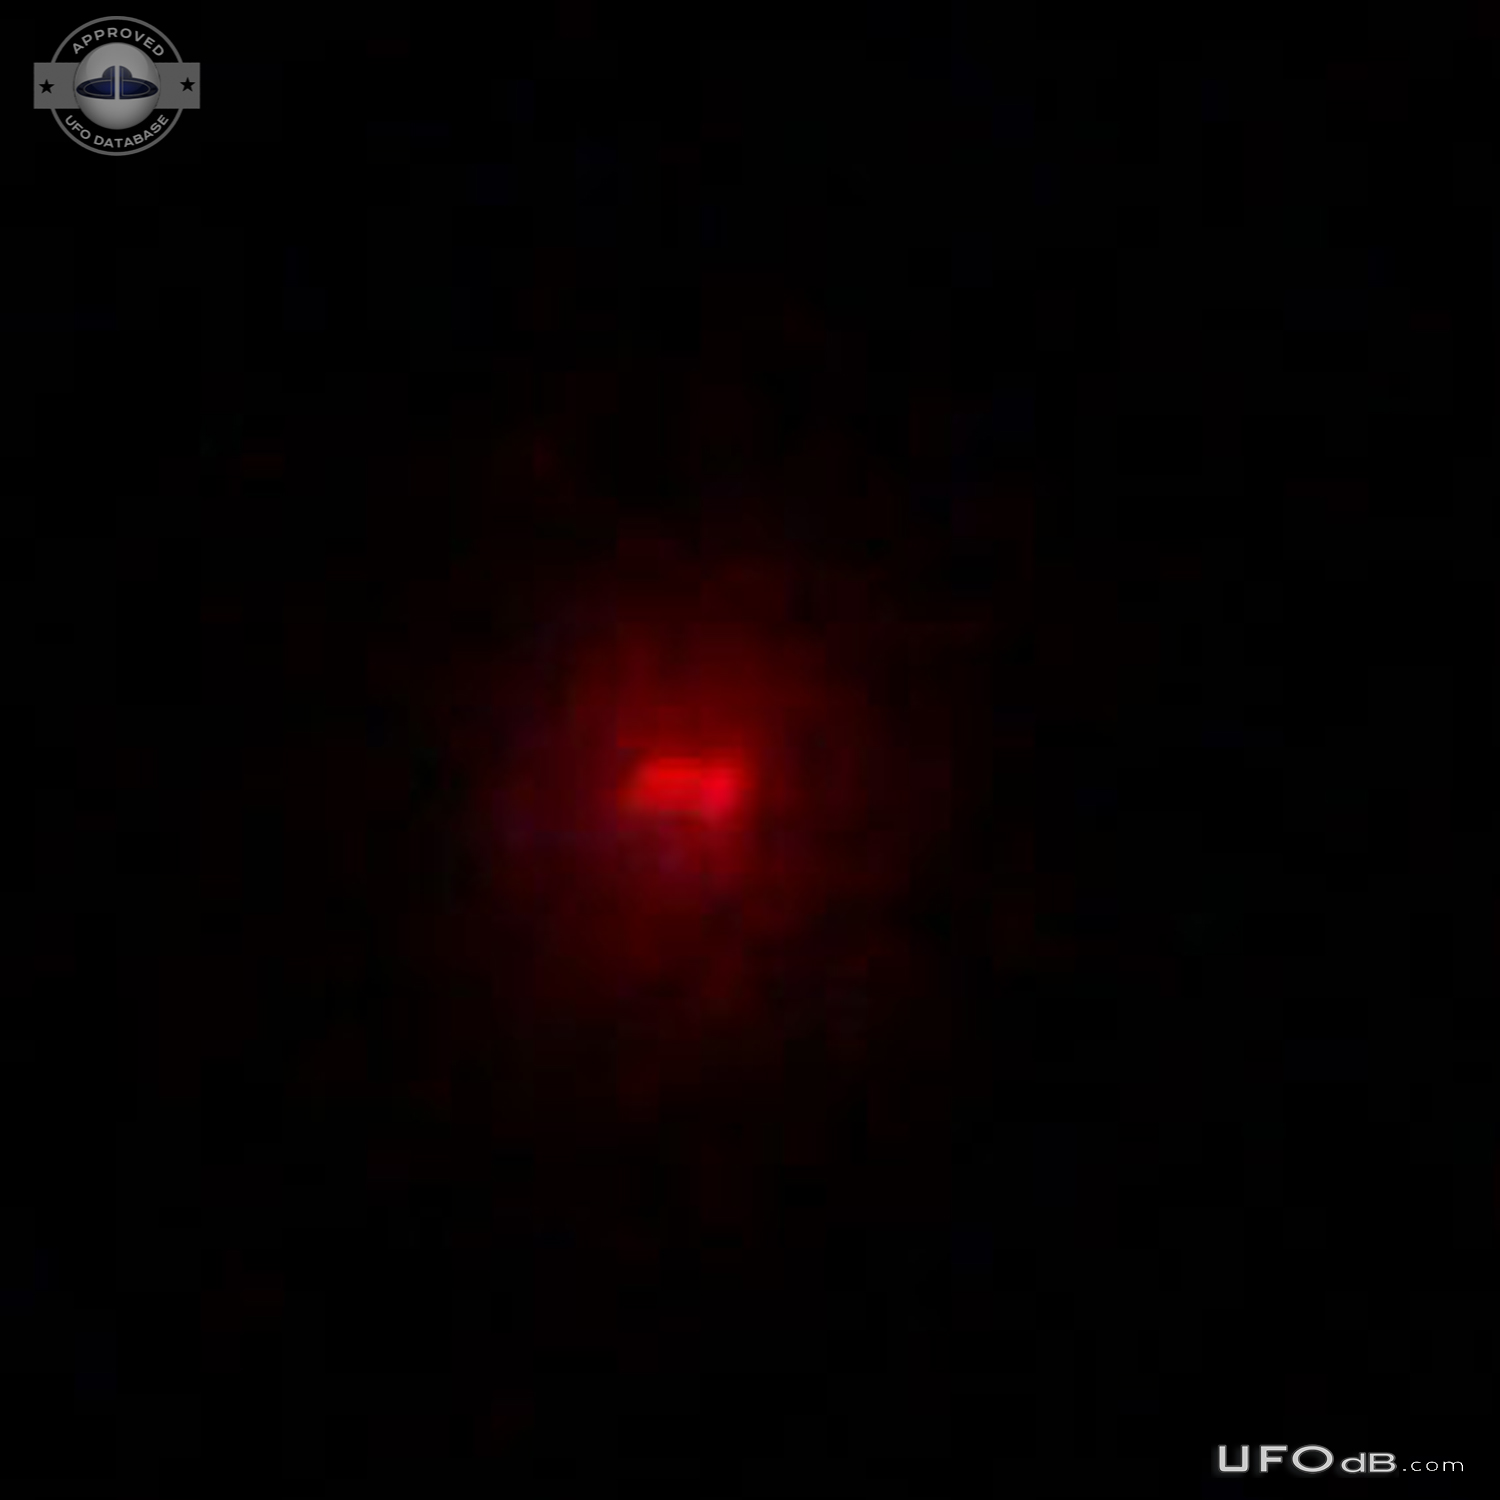 2 Red UFOs illuminating the Clouds - Toddington, Bedfordshire UK 2013 UFO Picture #653-6